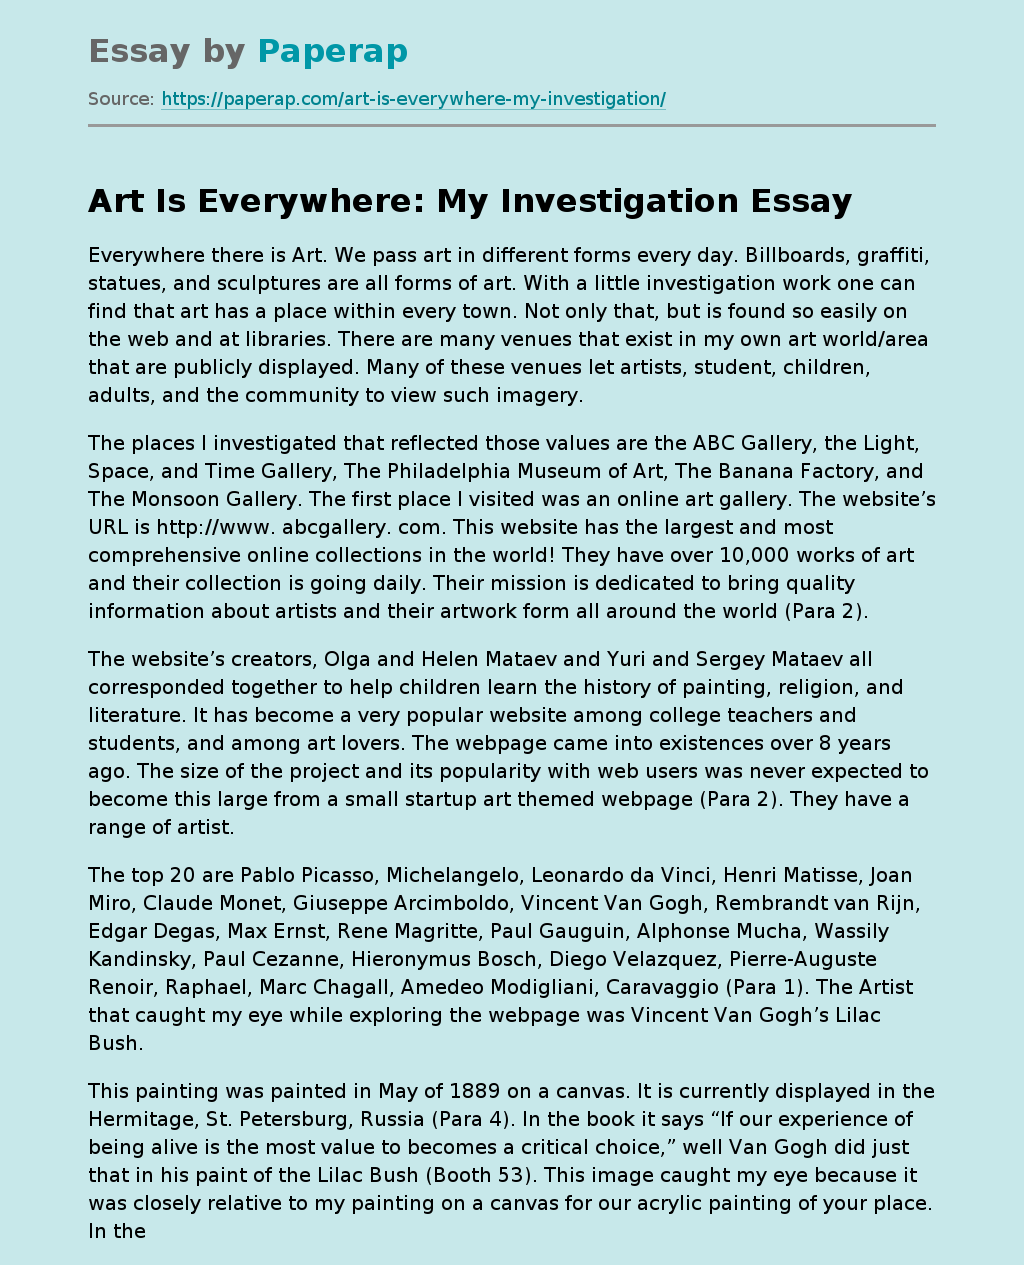 Art Is Everywhere: My Investigation